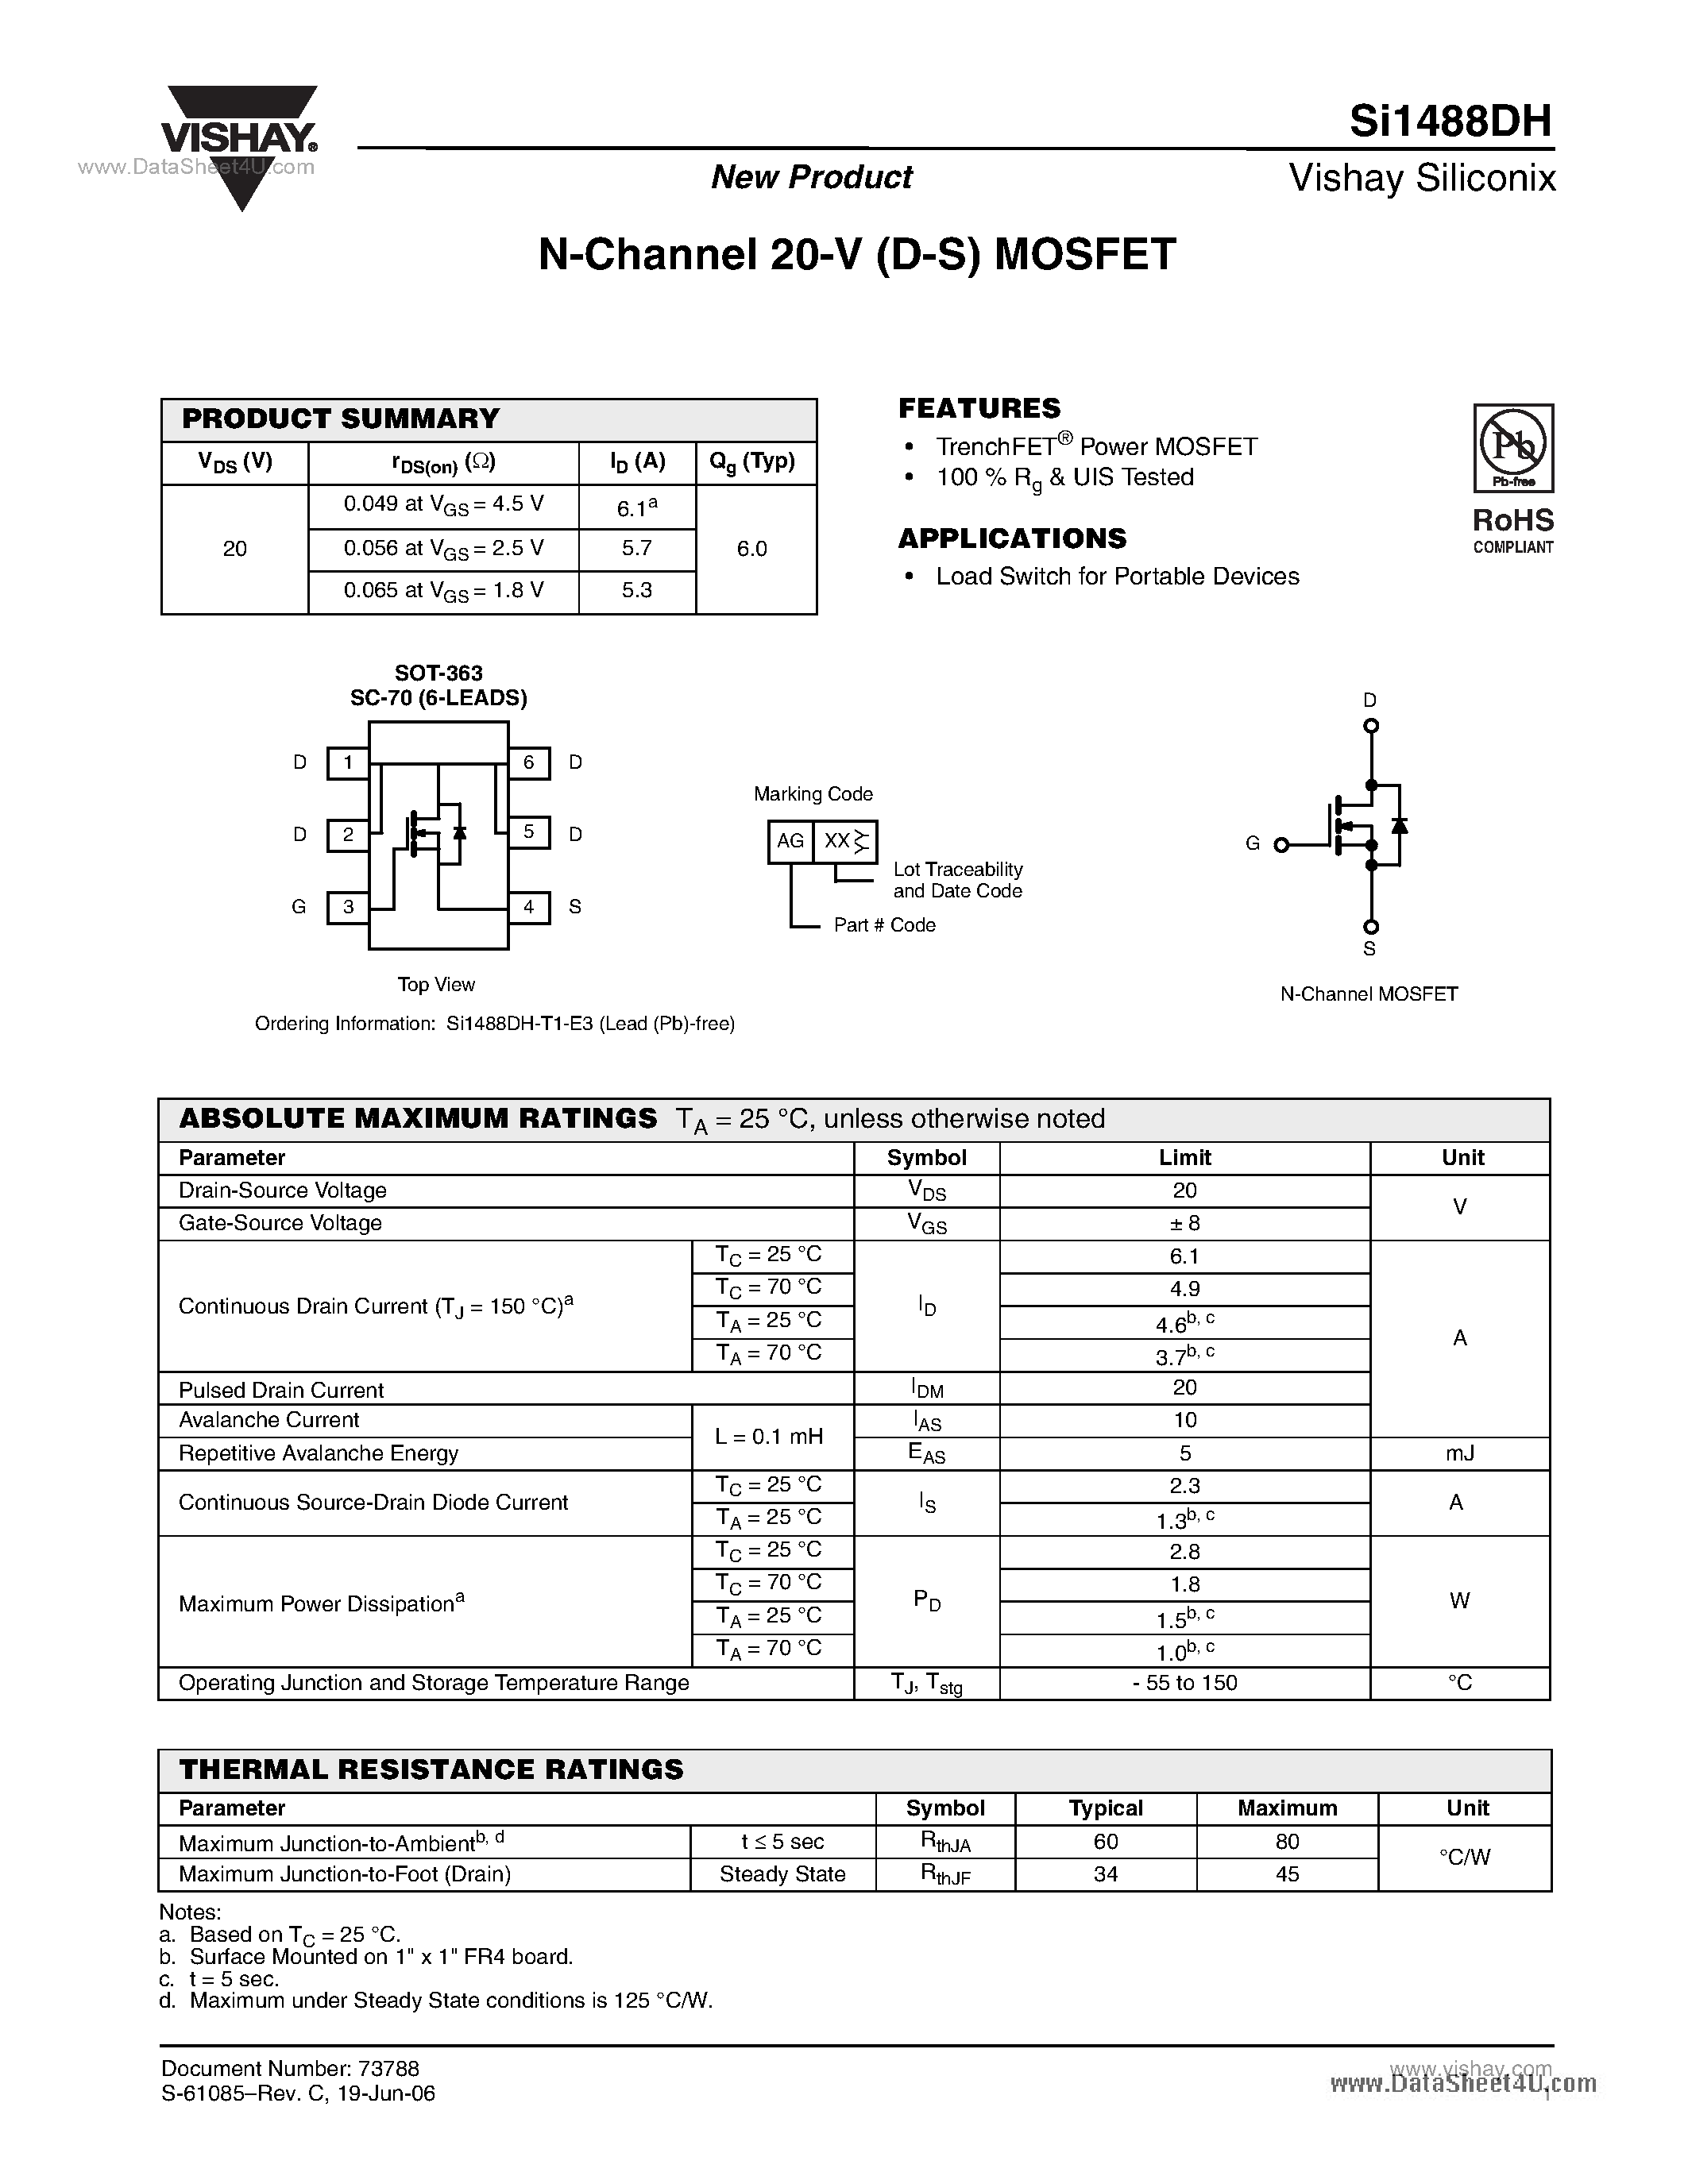 Даташит SI1488DH - N-Channel 20-V (D-S) MOSFET страница 1